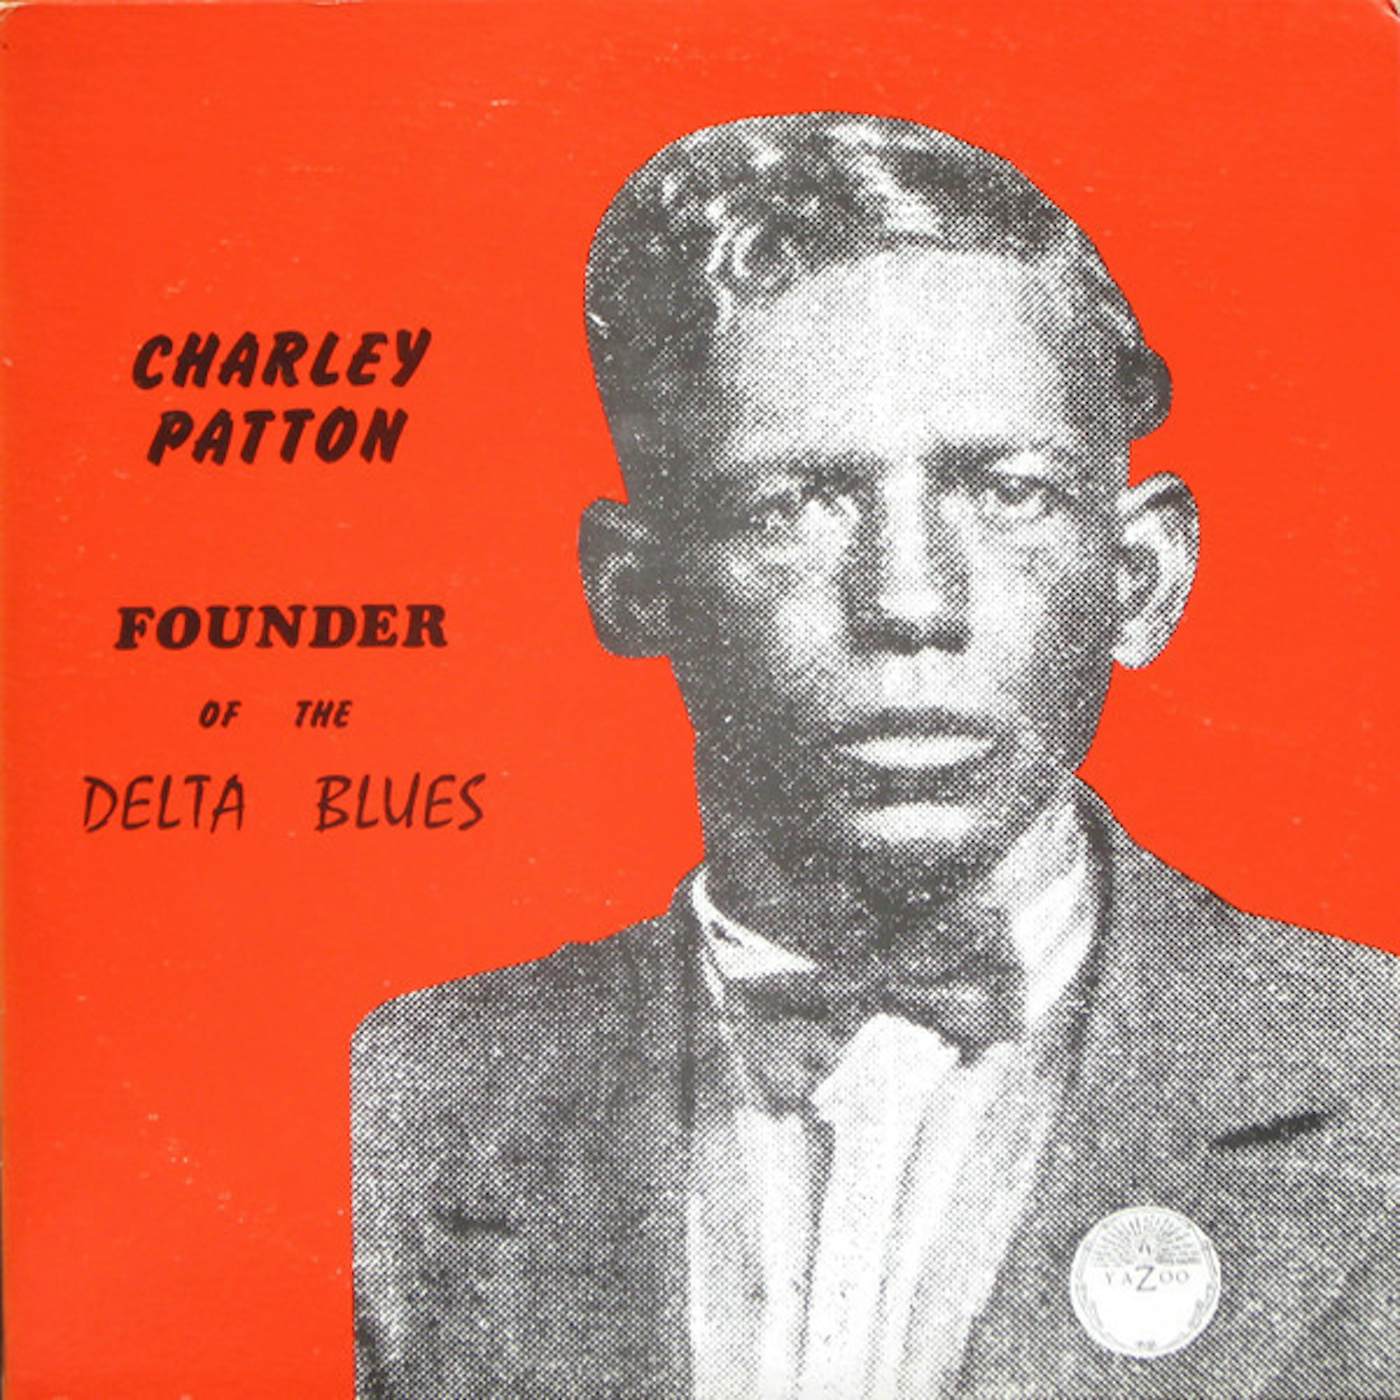 Charley Patton Founder Of The Delta Blues Vinyl Record